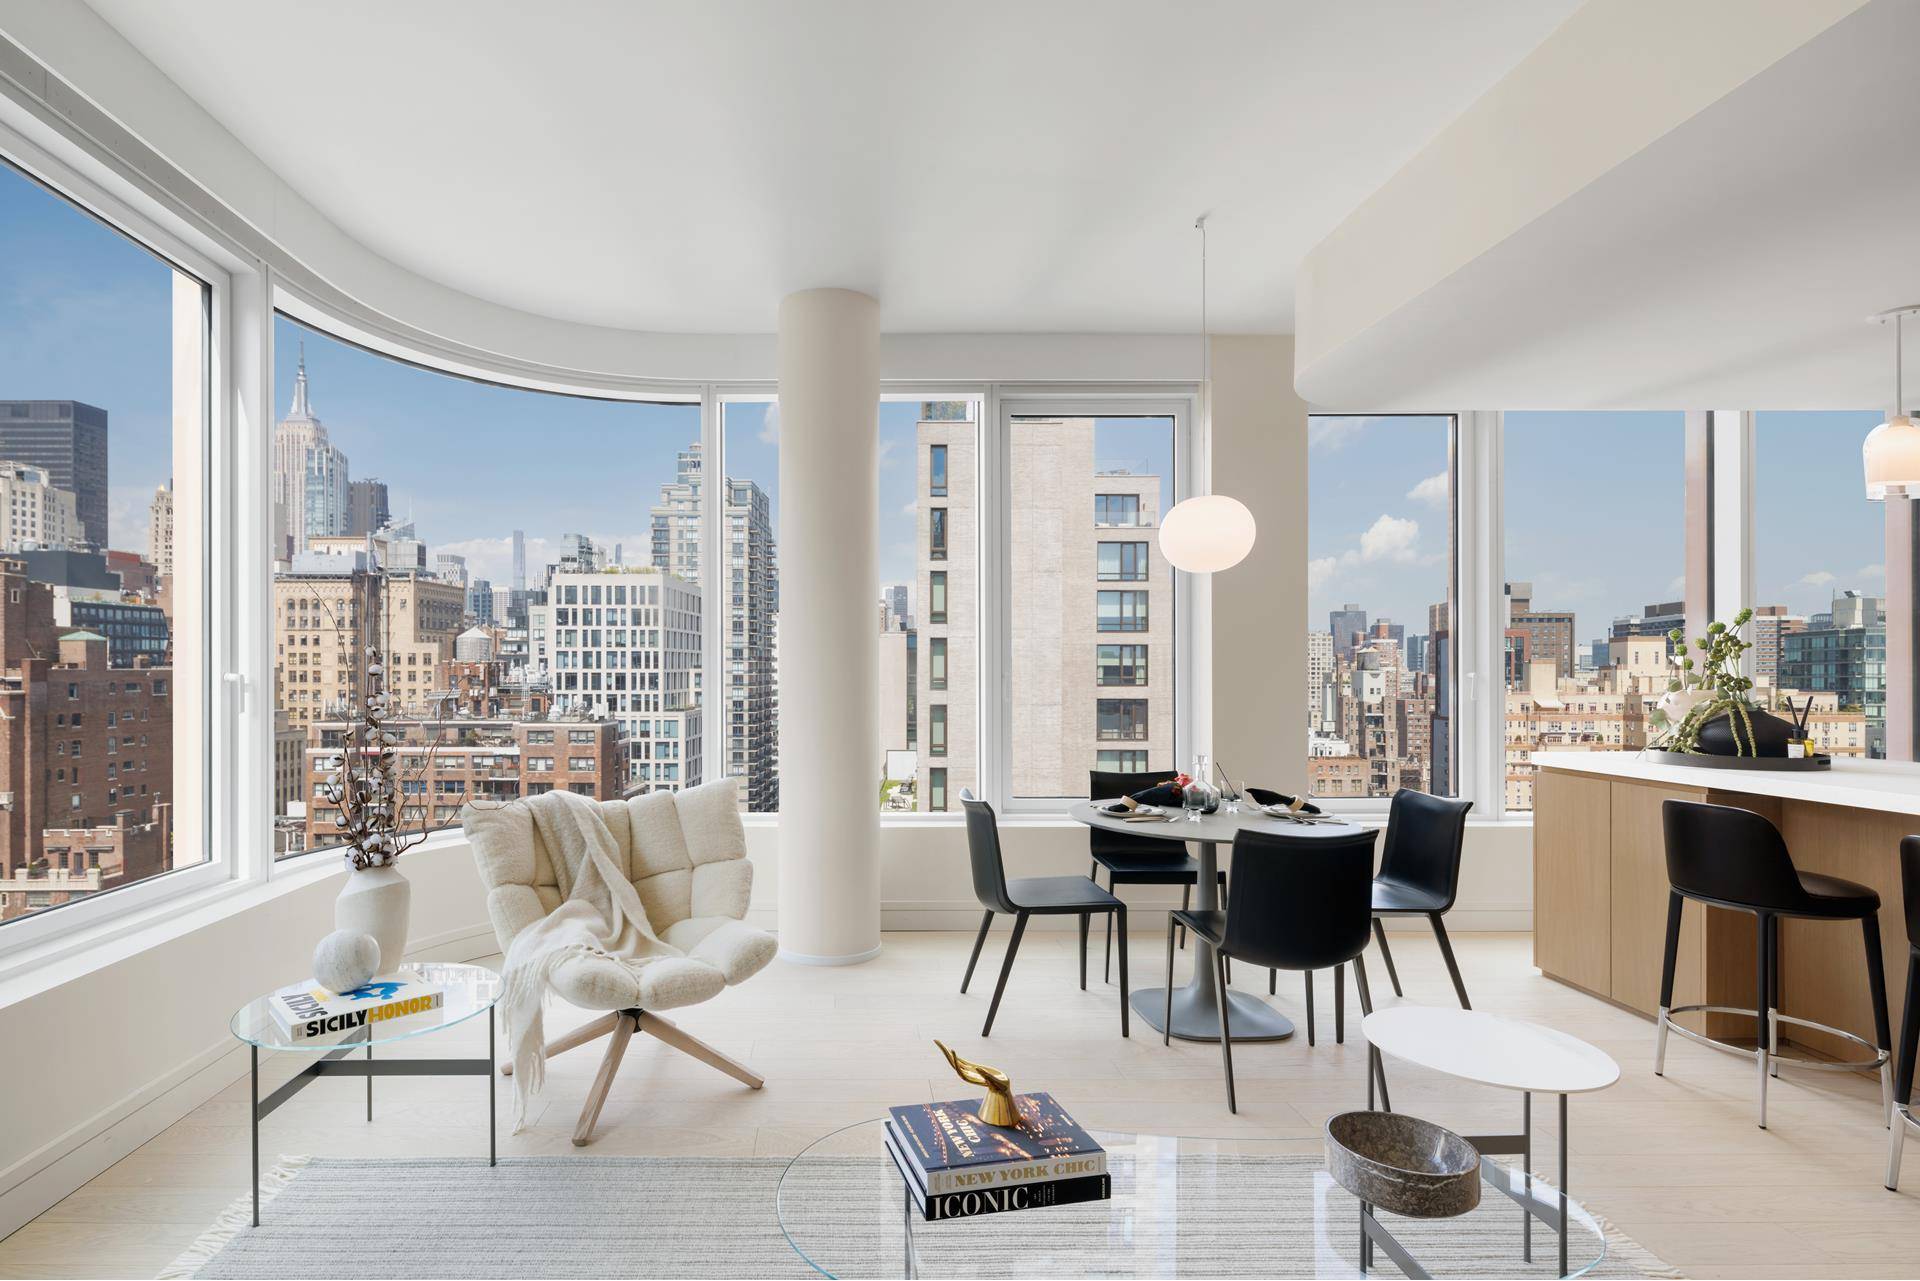 Immediate occupancy. A delicate curve, an elegantly articulated line the exquisite craft of 200 East 20th is expressed through restrained silhouettes, expressive detail, and indulgent tactility.